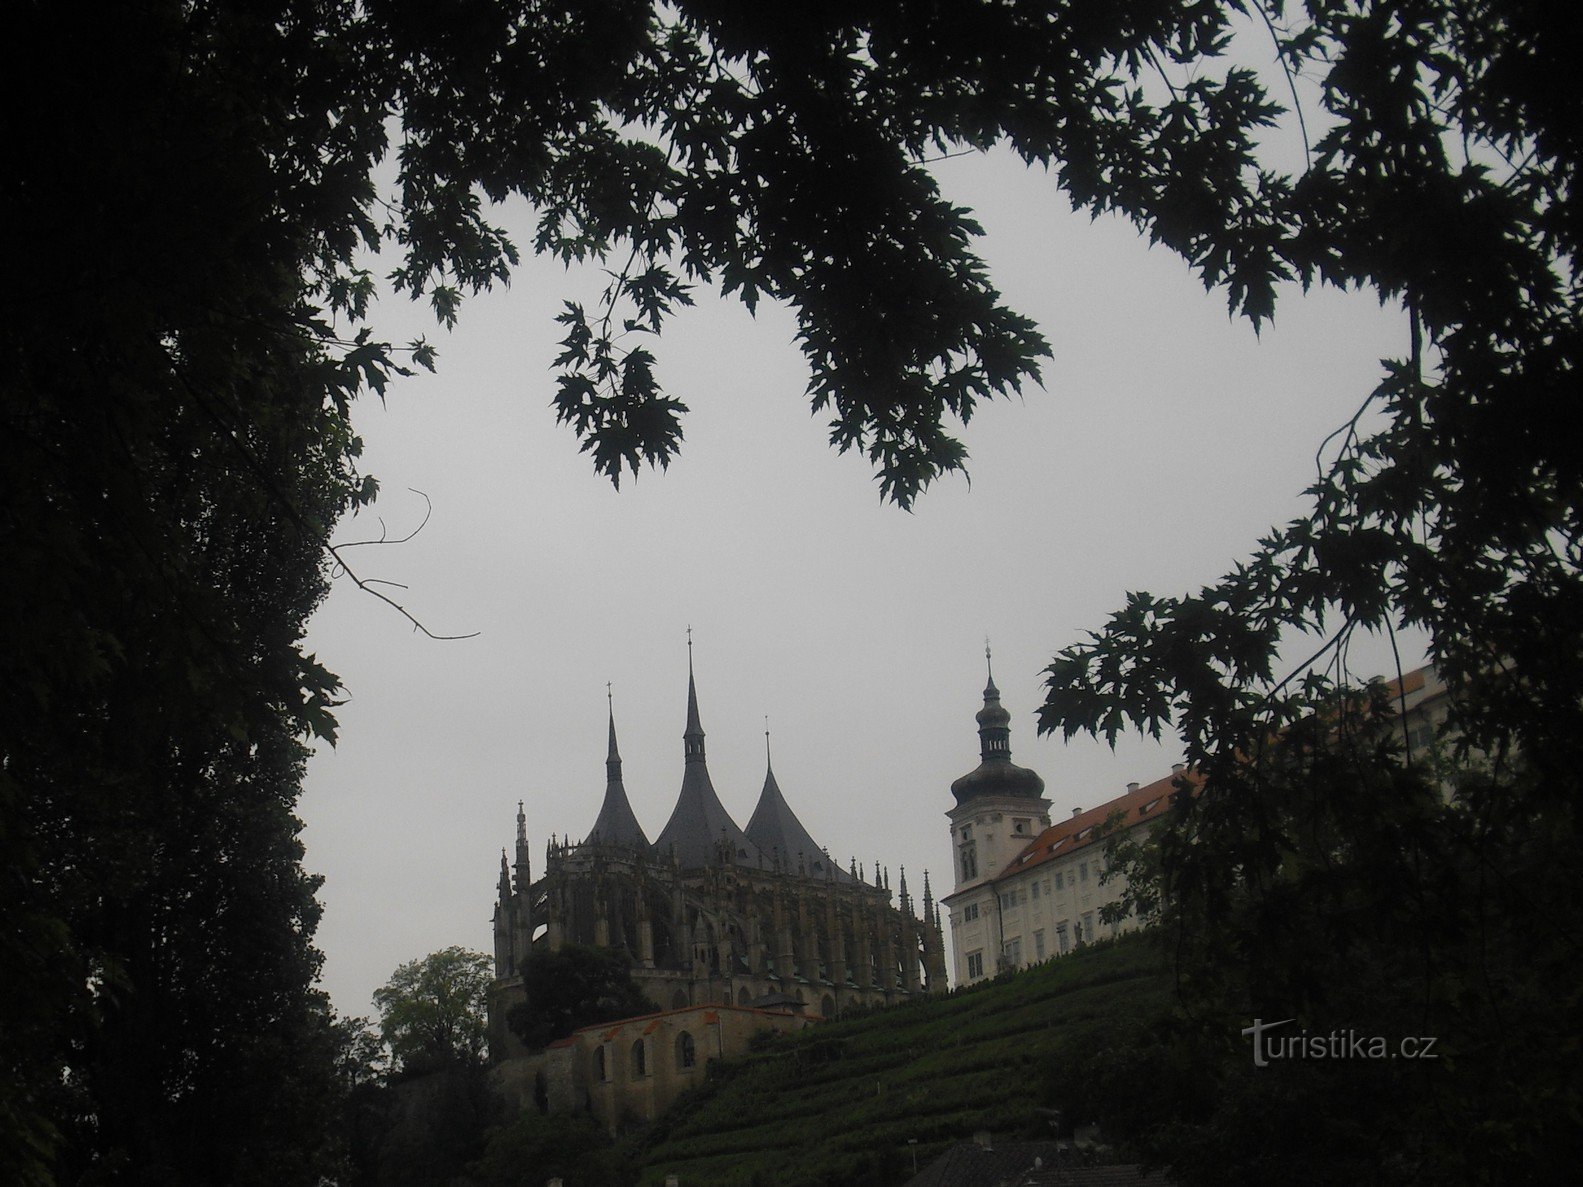 Pictures from Kutná Hora - lofty and architecturally captivating "Saint Barbara"